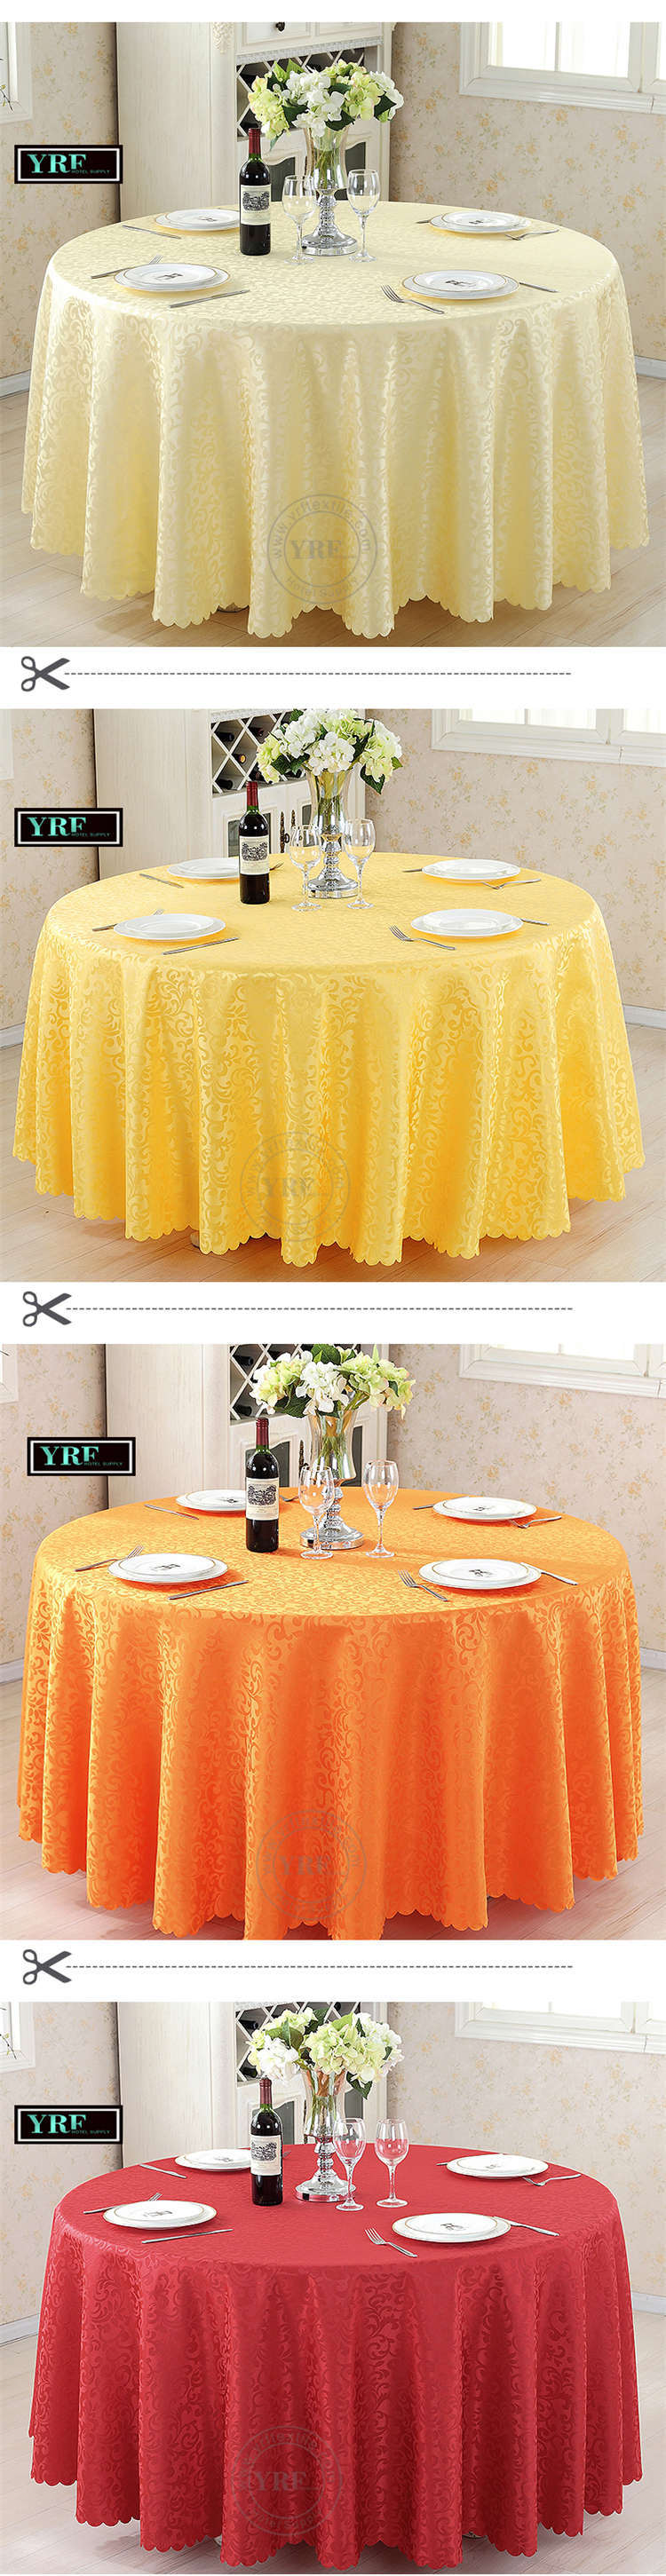 Guangdong Tablecloth 120 Table Linen 120 Inch Round Polyester Tablecloth